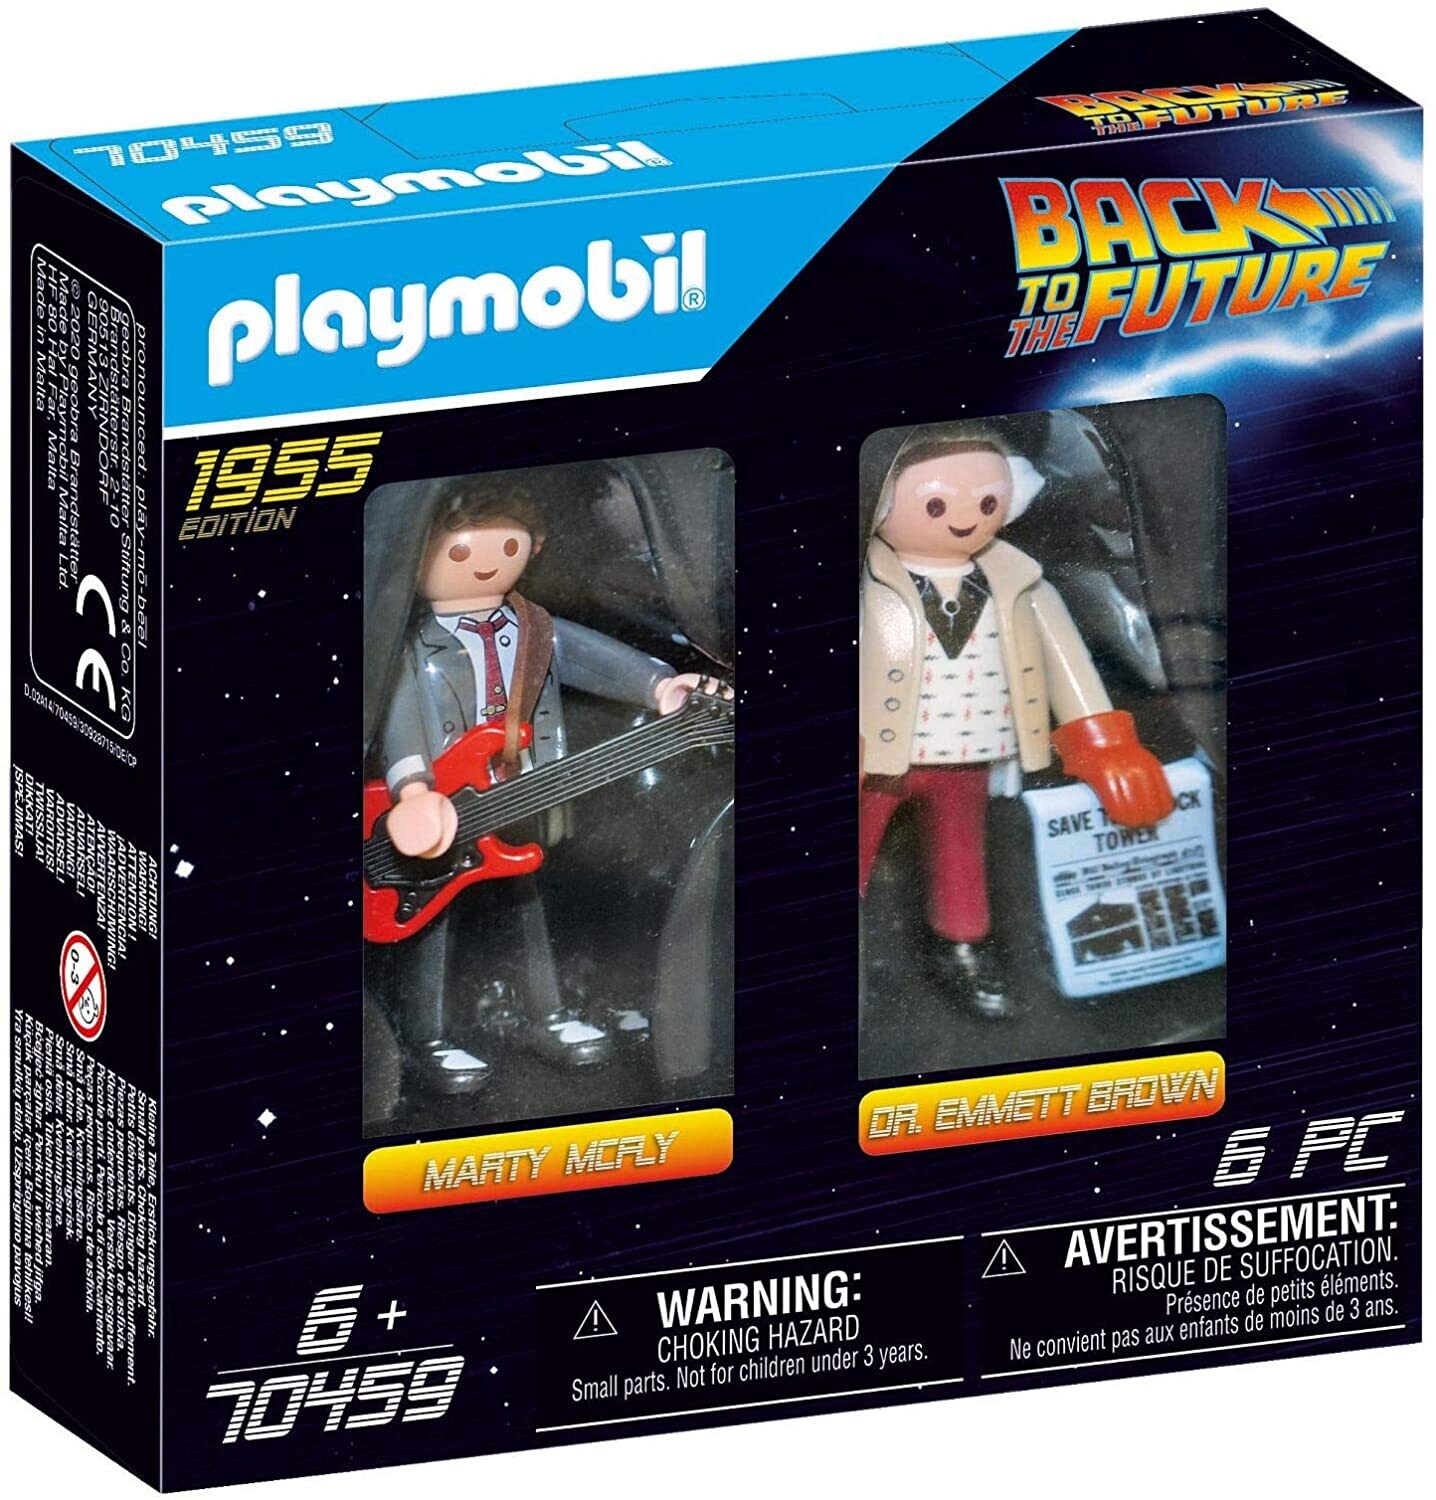 Playmobil, Back To The Future 1955 edition